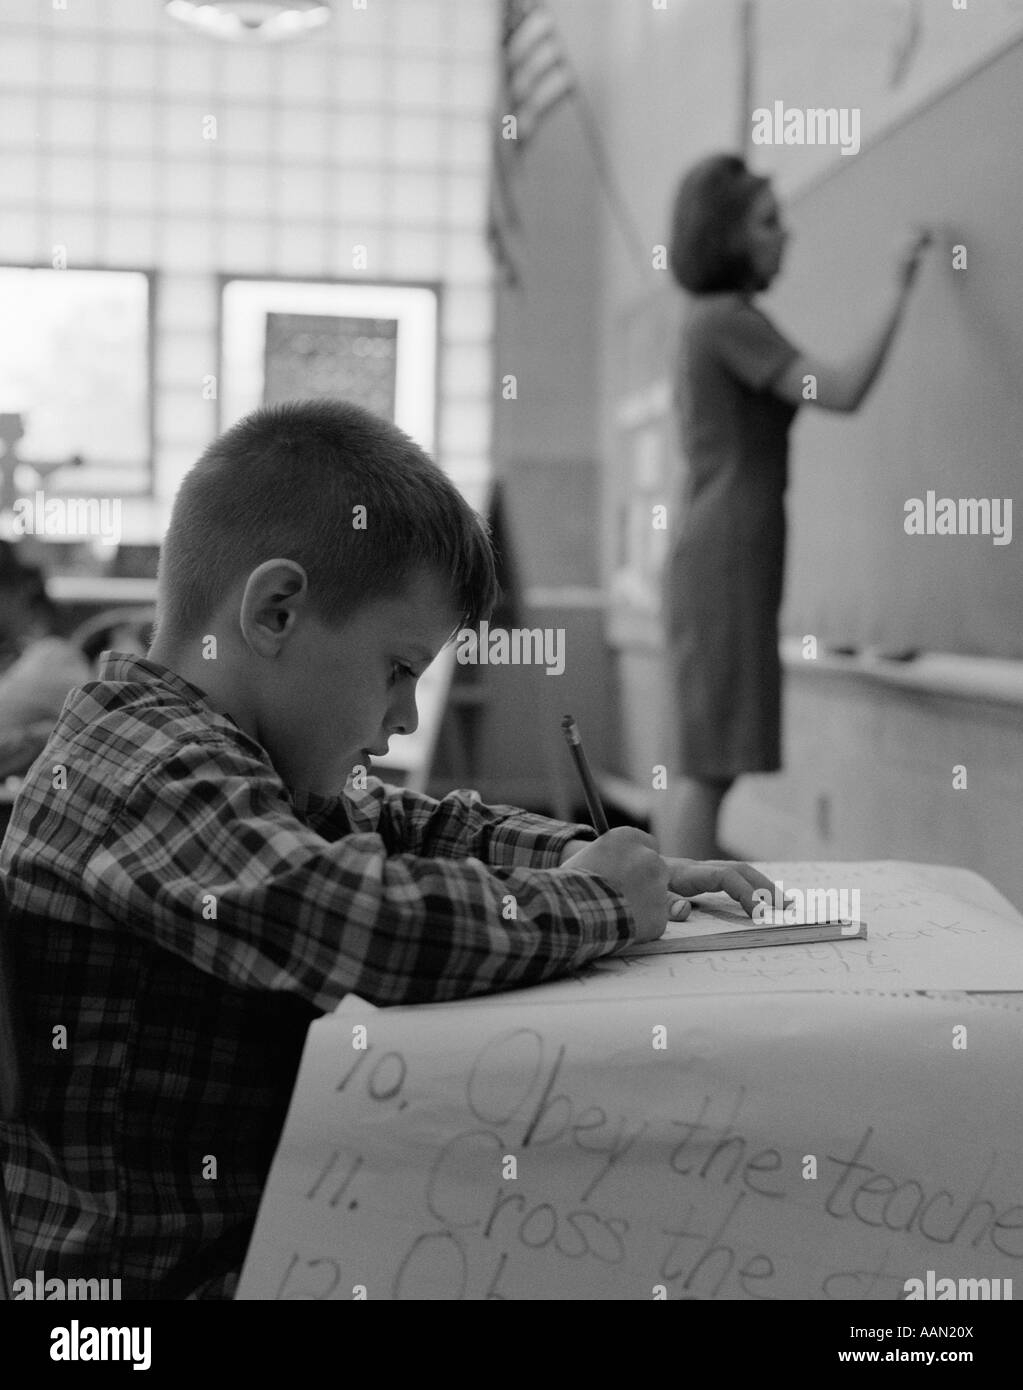 1960s SIDE VIEW OF GRADE SCHOOL BOY AT DESK WRITING WITH TEACHER WRITING ON BLACKBOARD IN SOFT FOCUS IN BACKGROUND Stock Photo